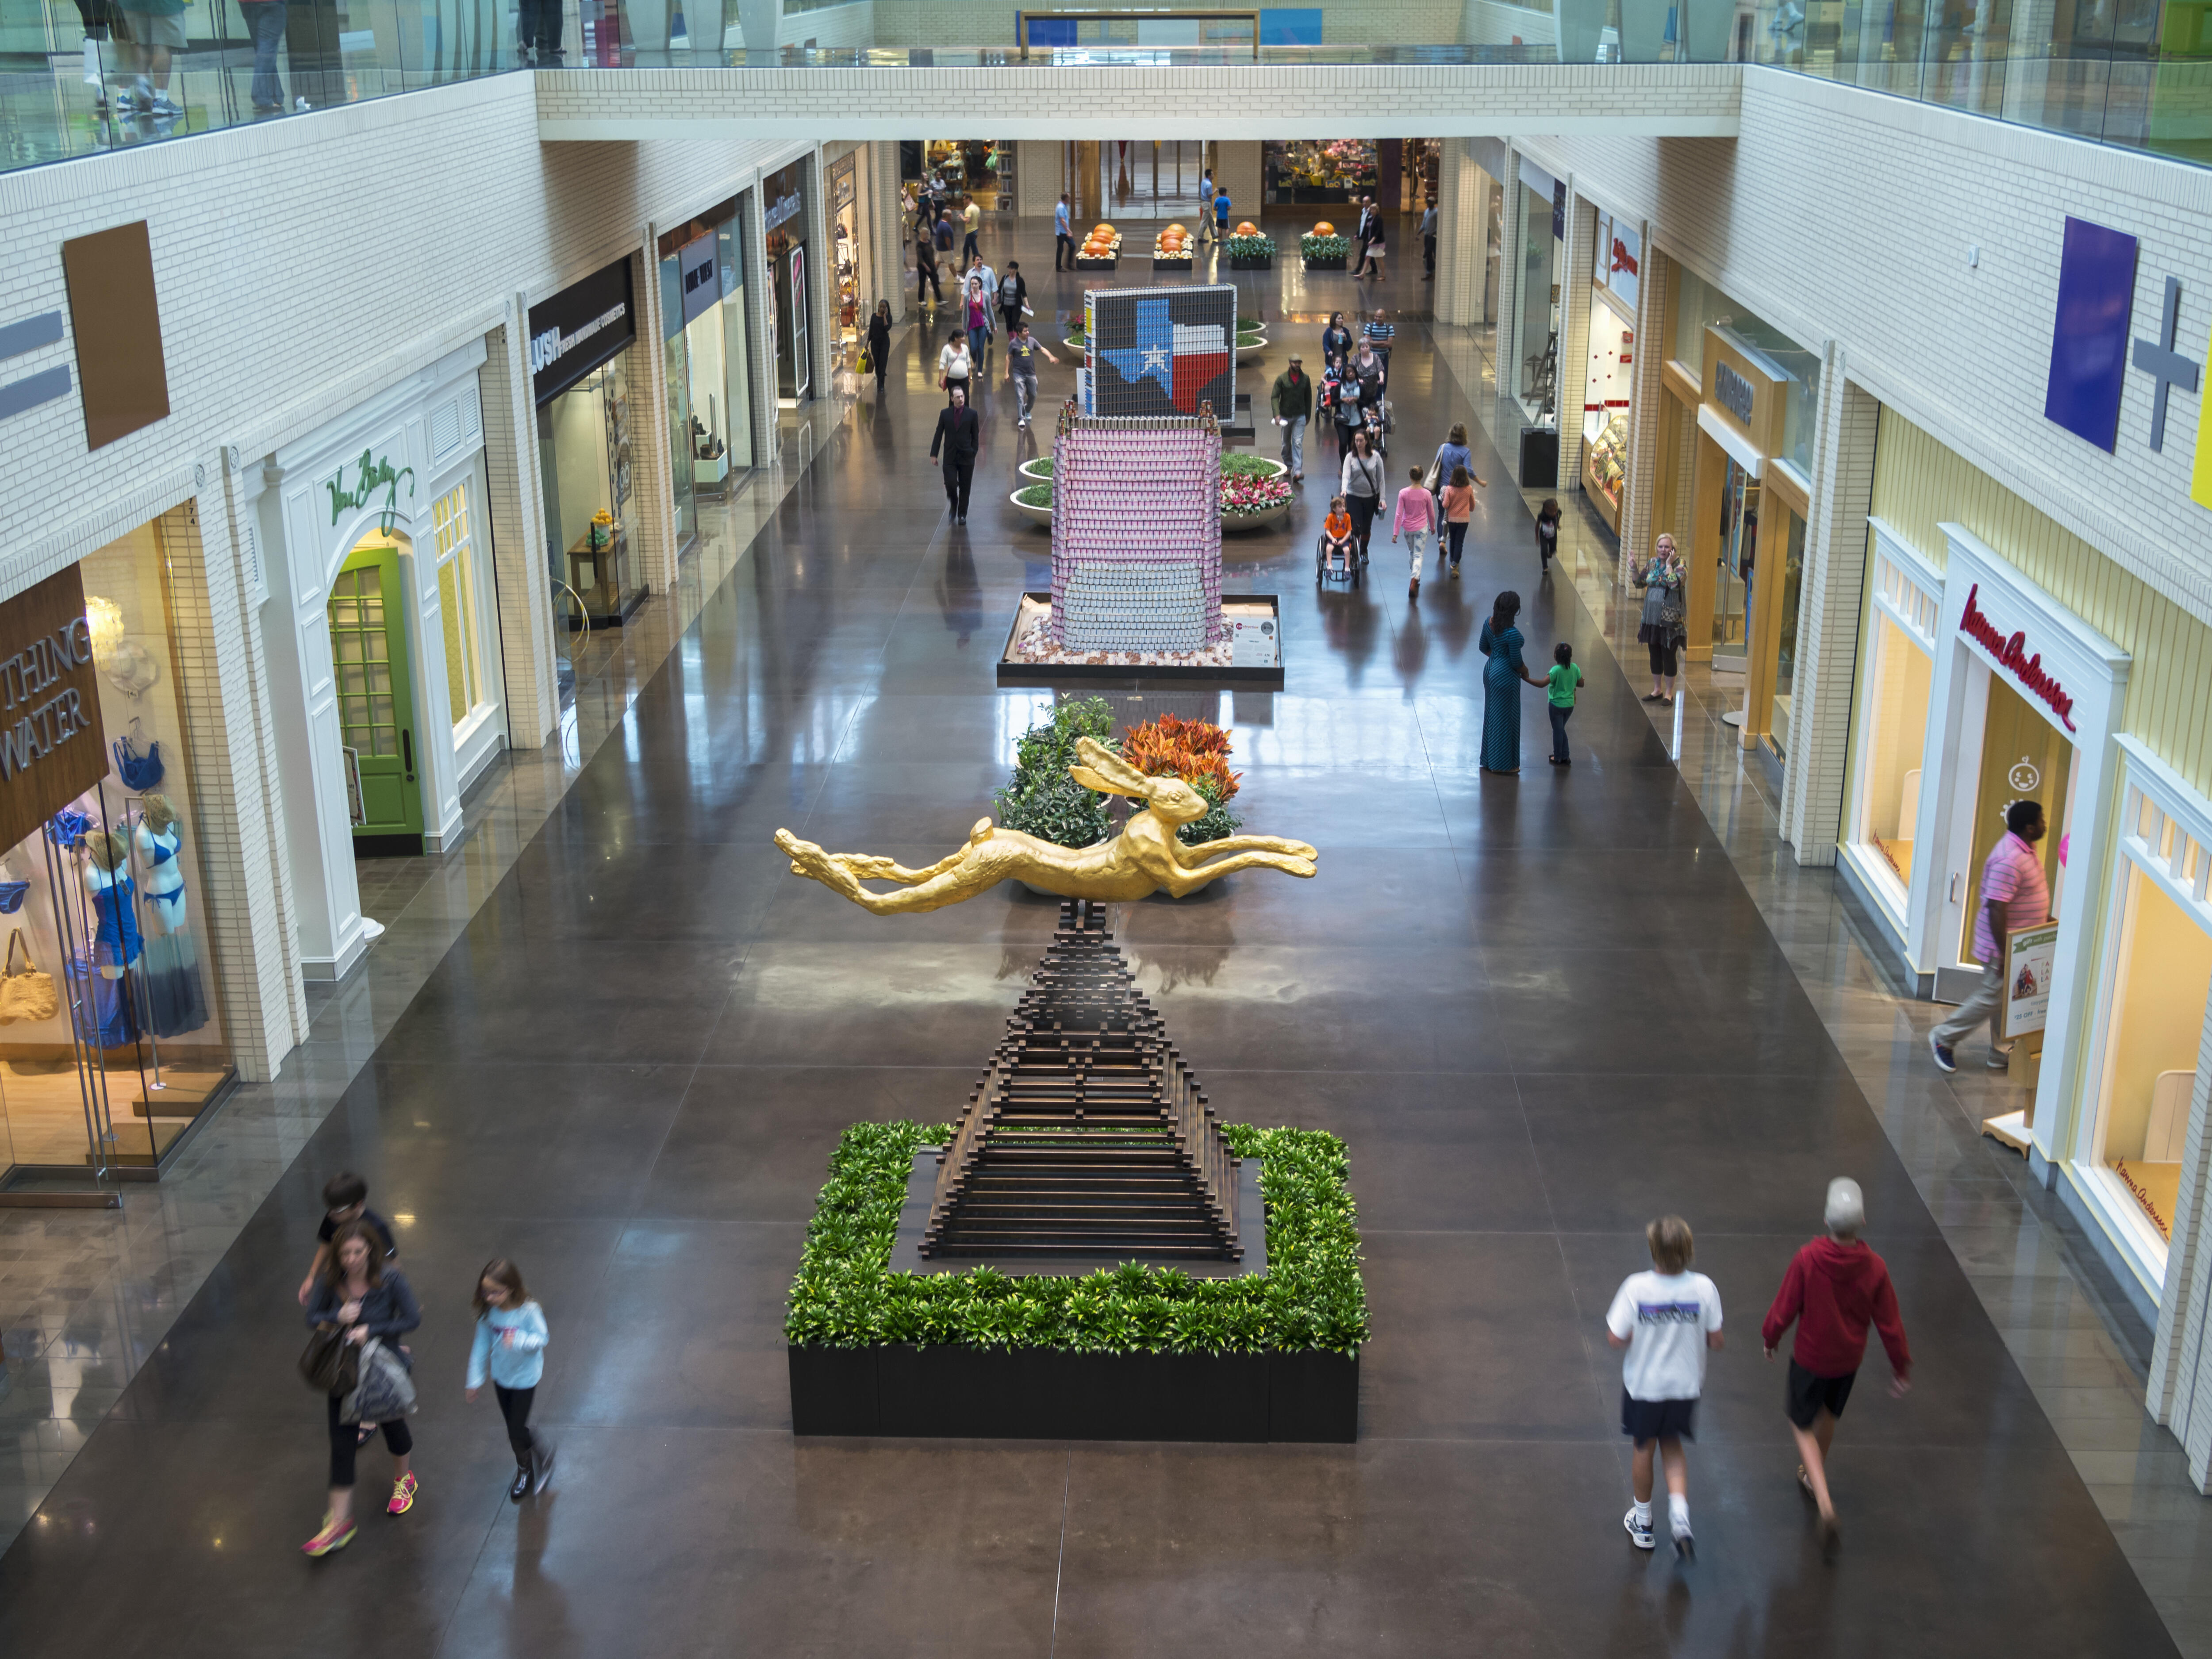 Man Banging Skateboard On Floor Causes Dallas Mall To Evacuate